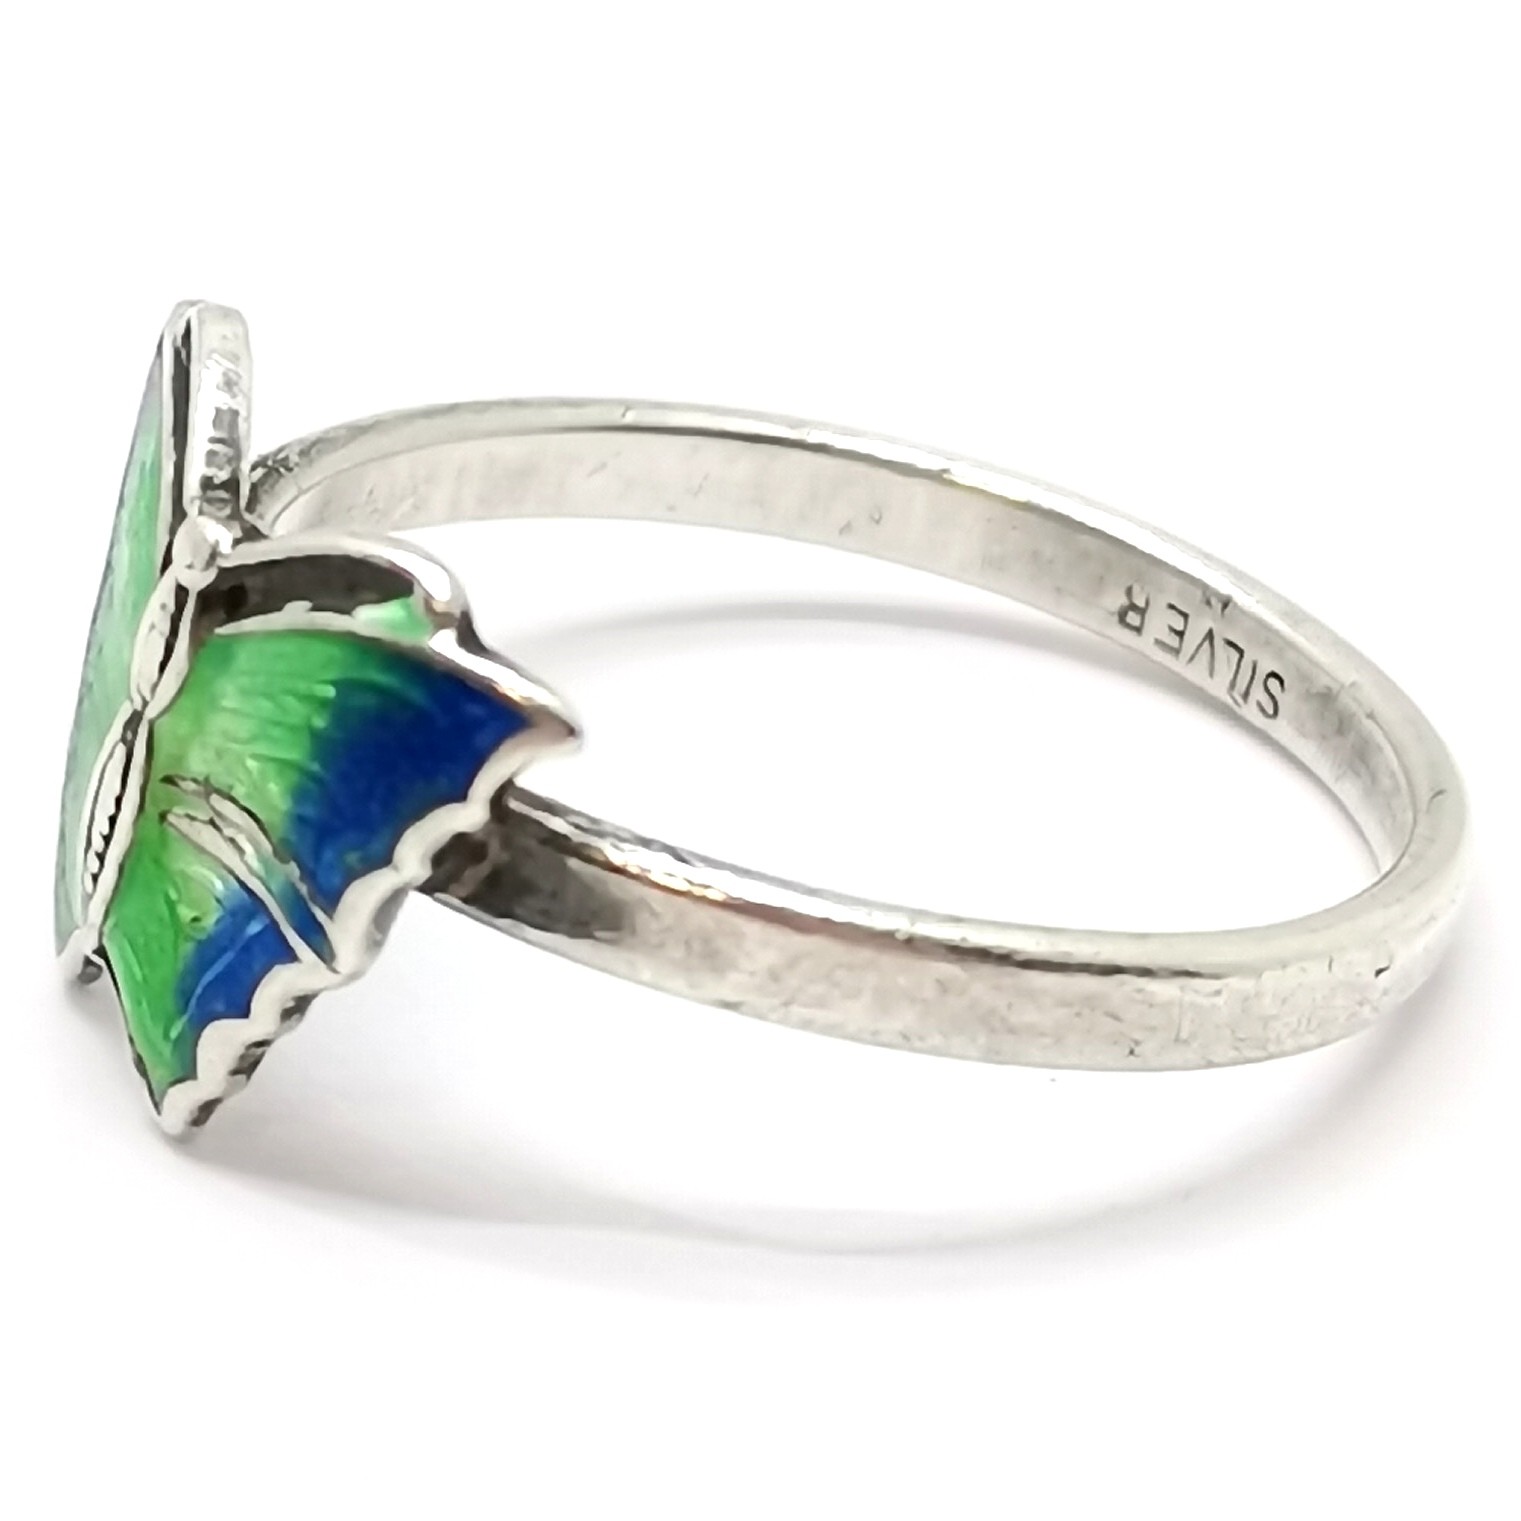 Silver marked enamel butterfly ring - size N & 2g total weight ~ no obvious damage - Image 2 of 3